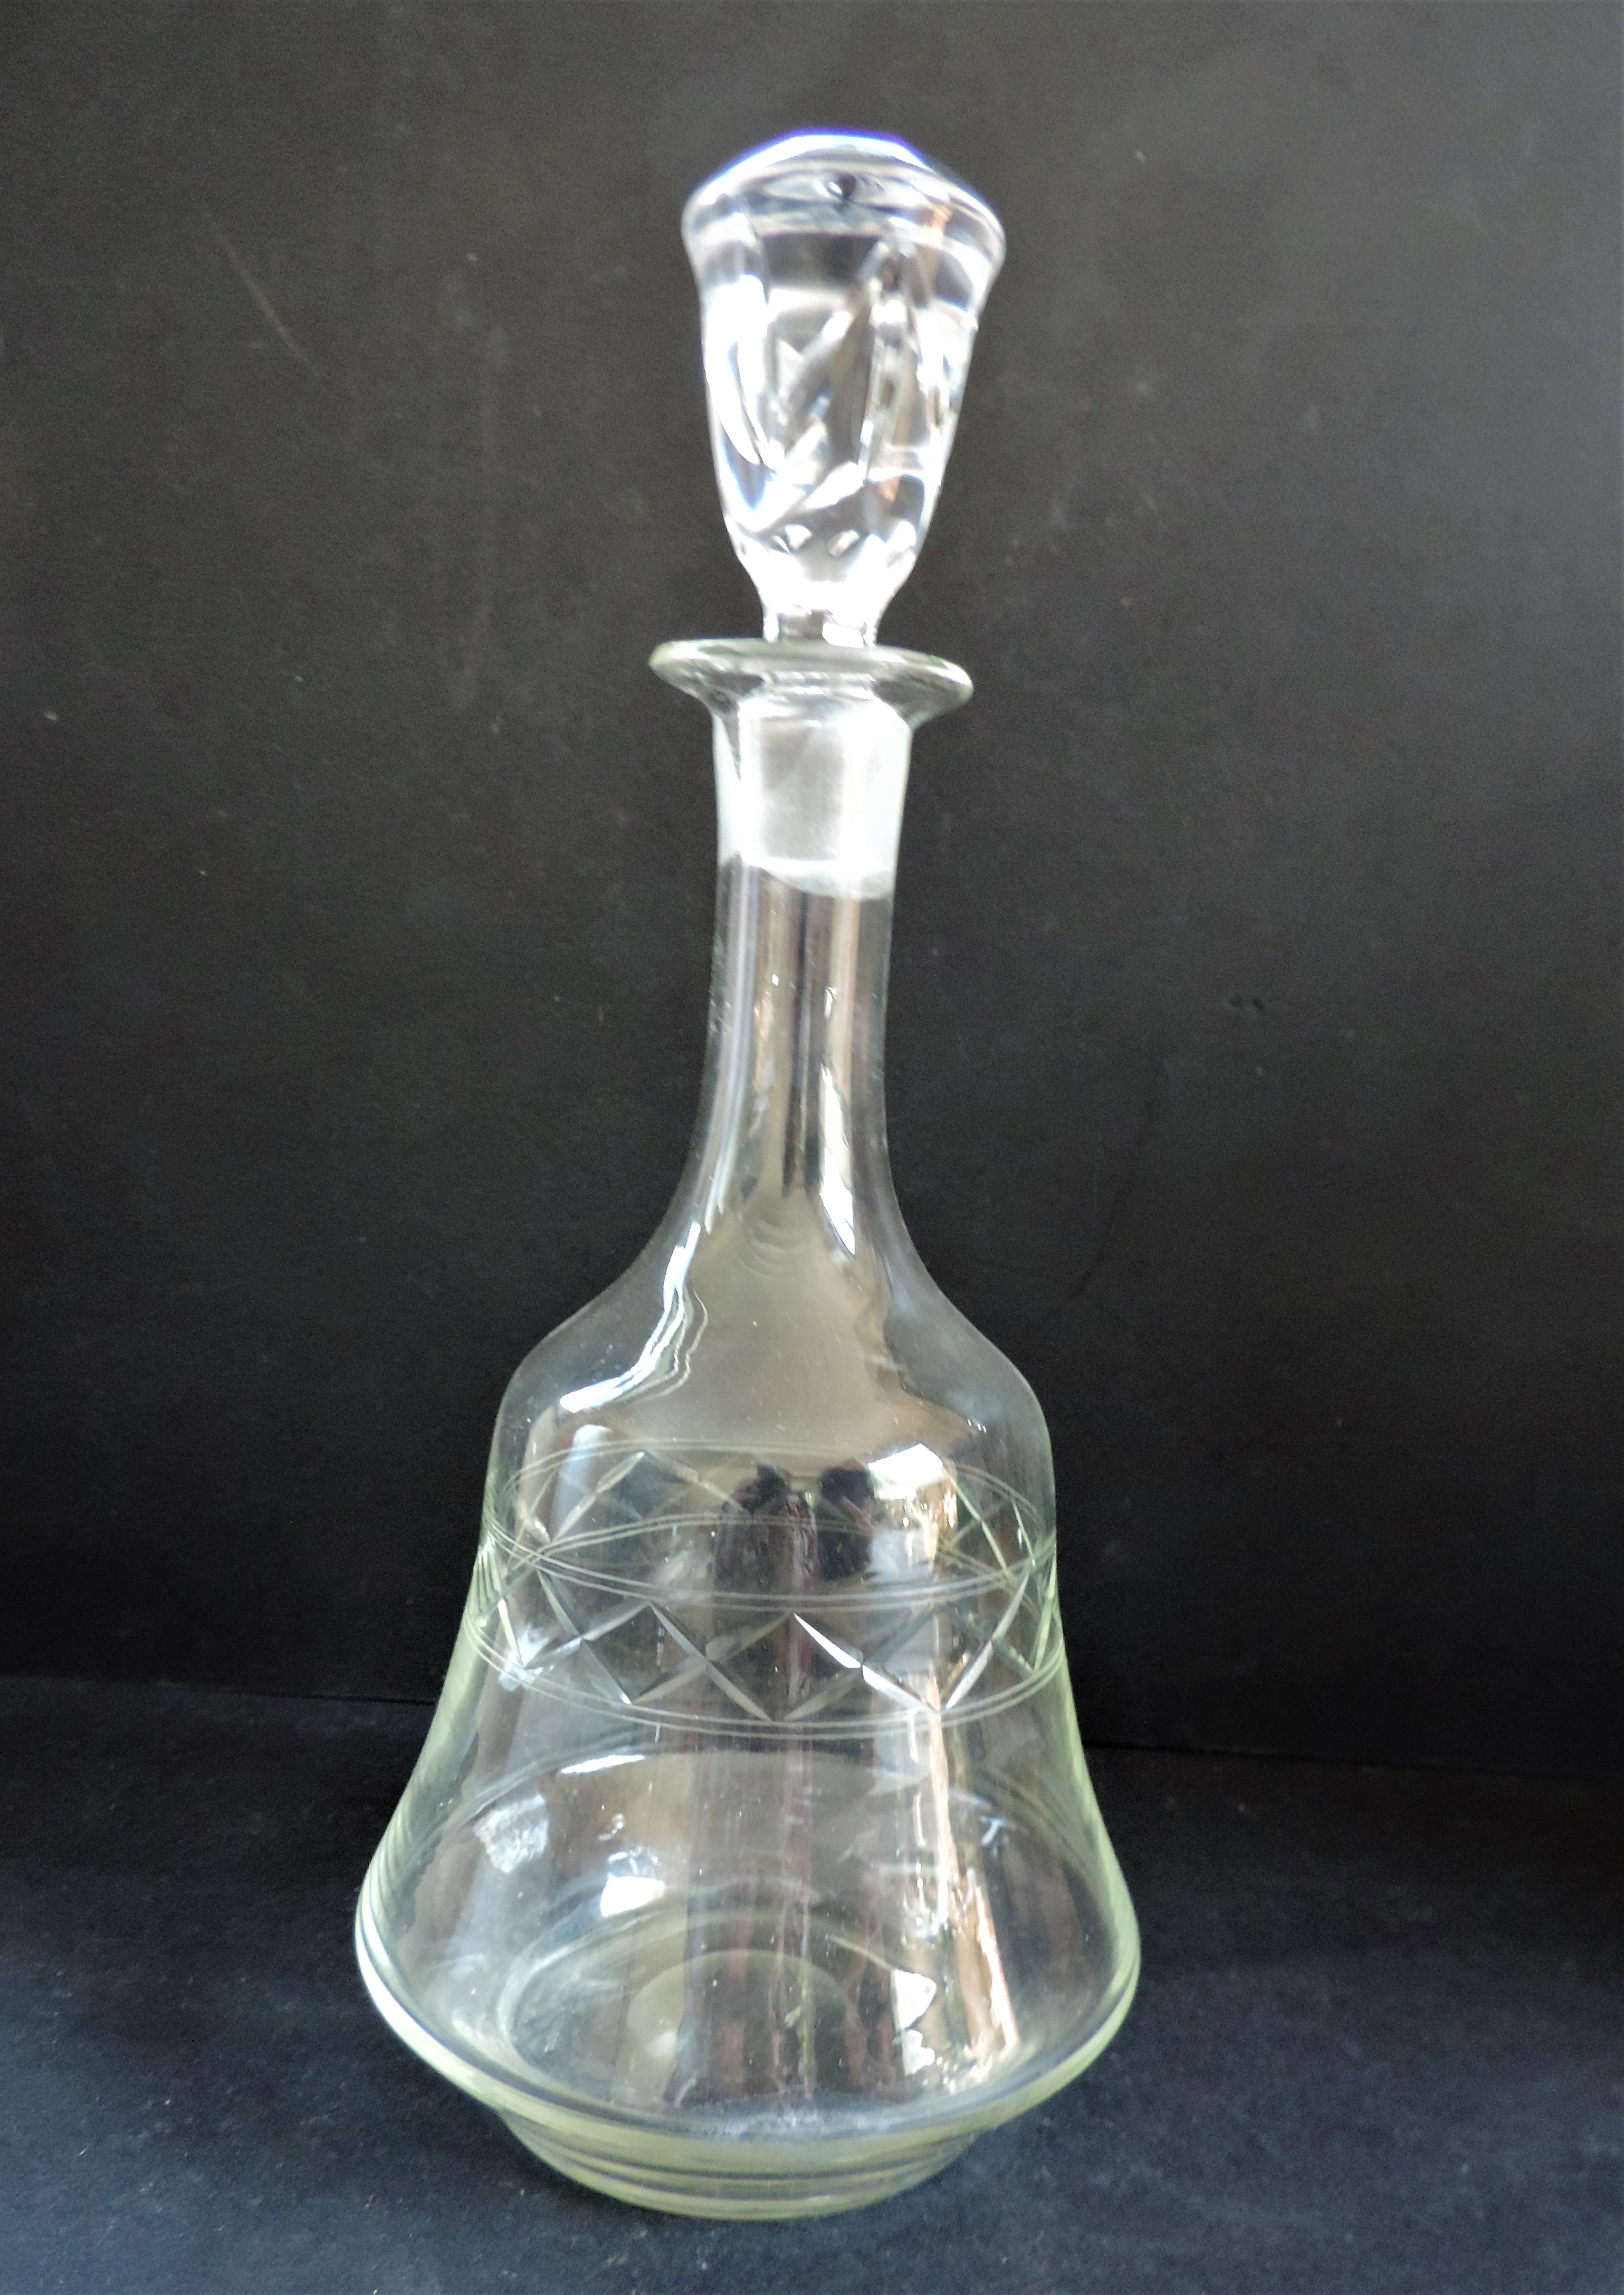 Antique Edwardian Bell Shaped Decanter - Image 4 of 4